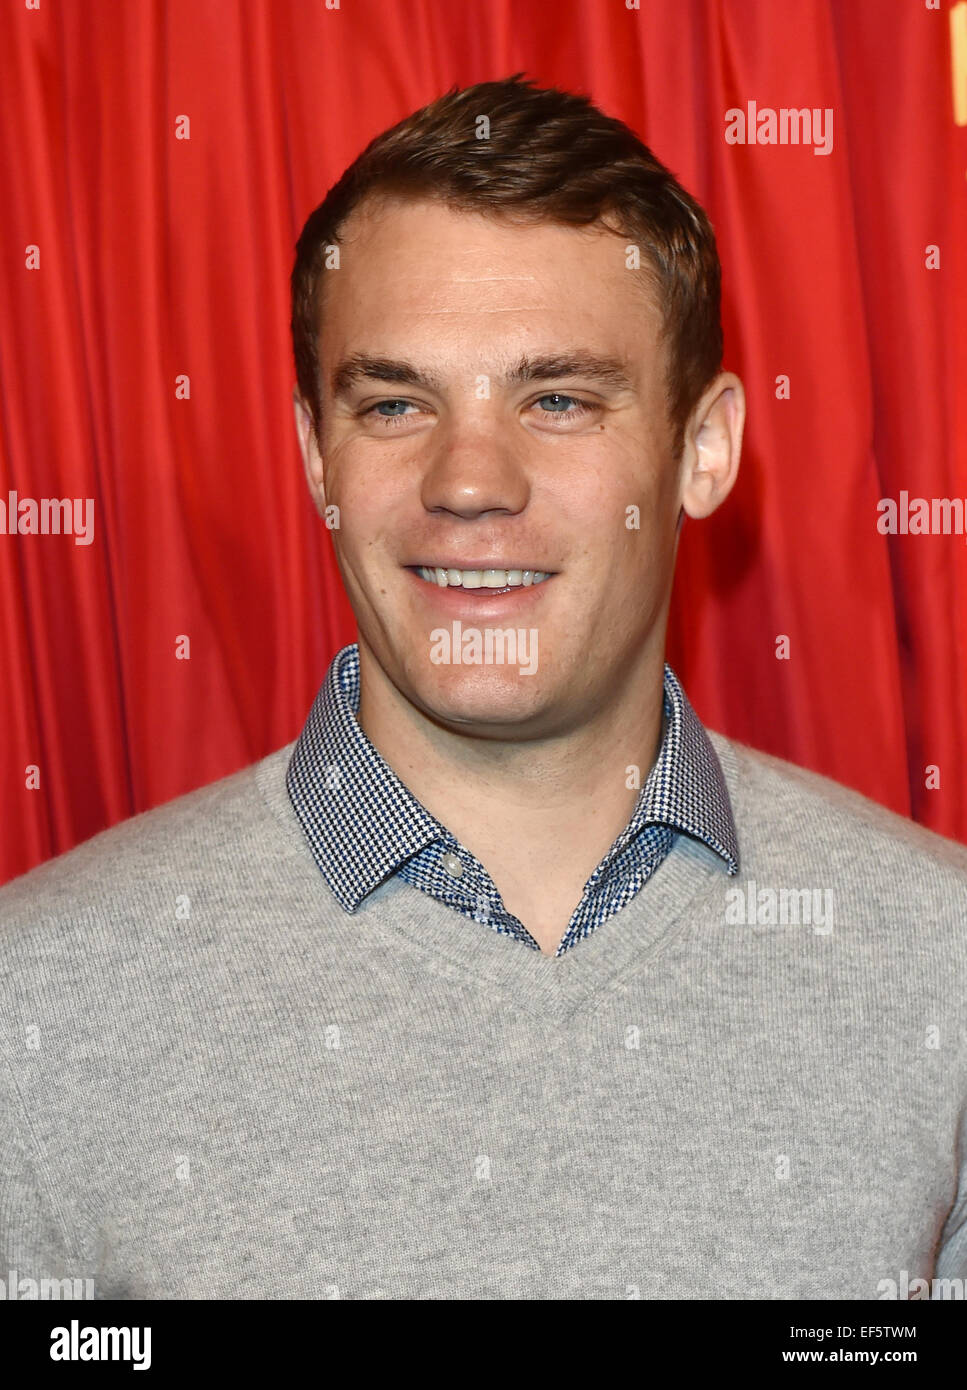 Berlin, Germany. 26th January, 2015. Manuel Neuer, goalkeeper for the national soccer team, poses next to his wax figure (not pictured) at Madame Tussauds in Berlin, Germany, 26 January 2015. It cost 200,000 Euros to make the figure, which can be seen in the sport section of the wax museum starting Tuesday, 27 January 2015. Photo: JENS KALAENE/dpa/ Alamy Live News Stock Photo